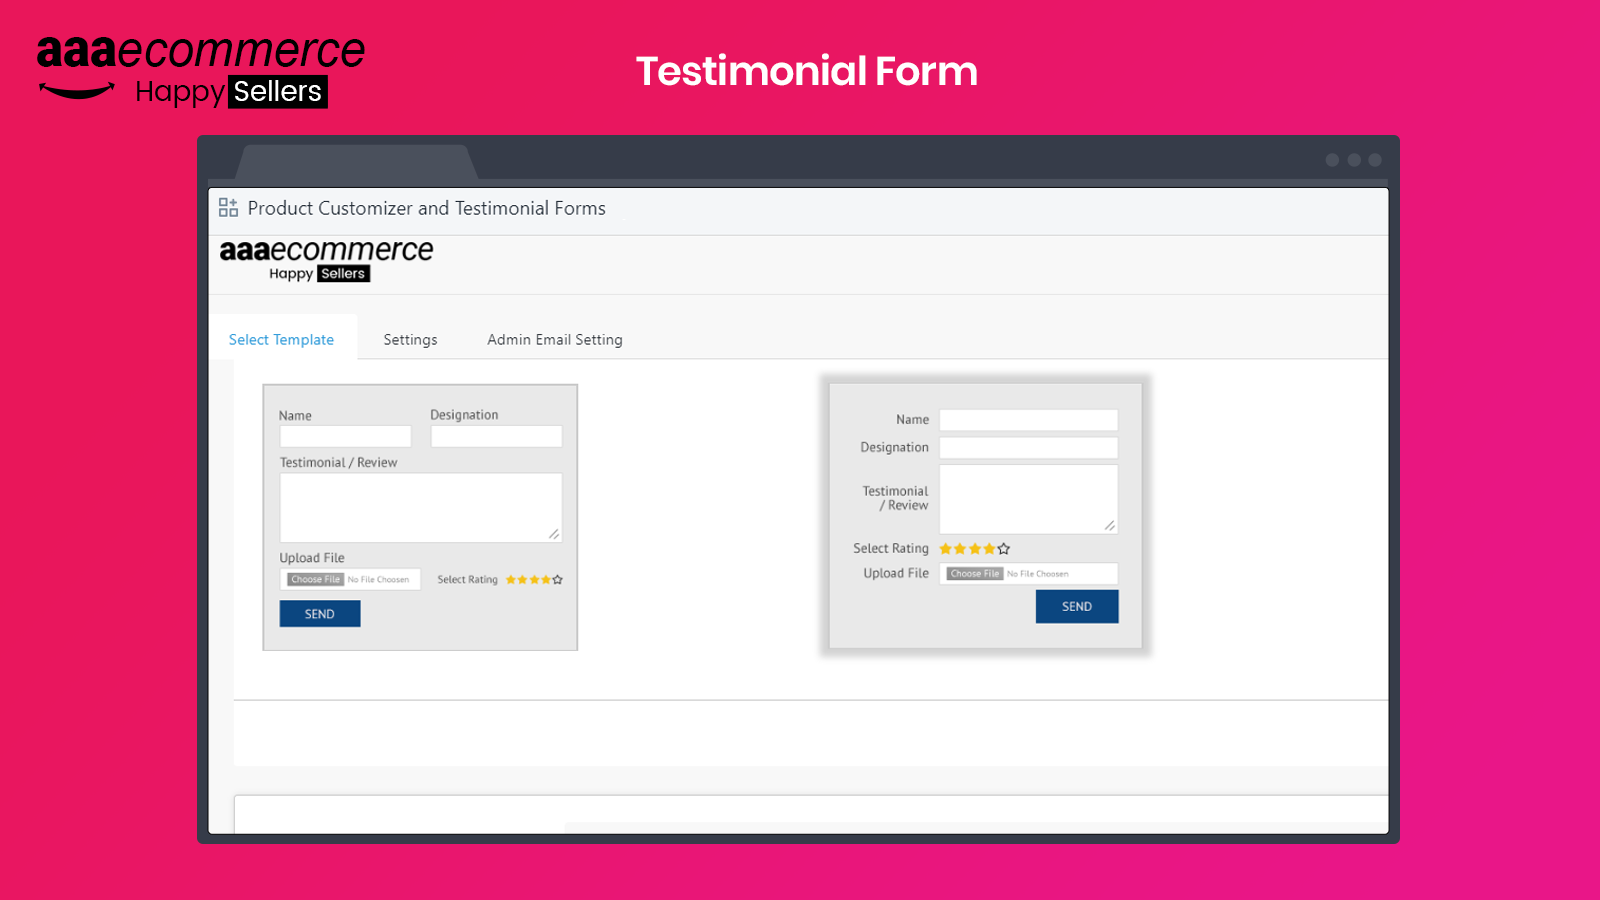 Product Option Field and Testimonial Form